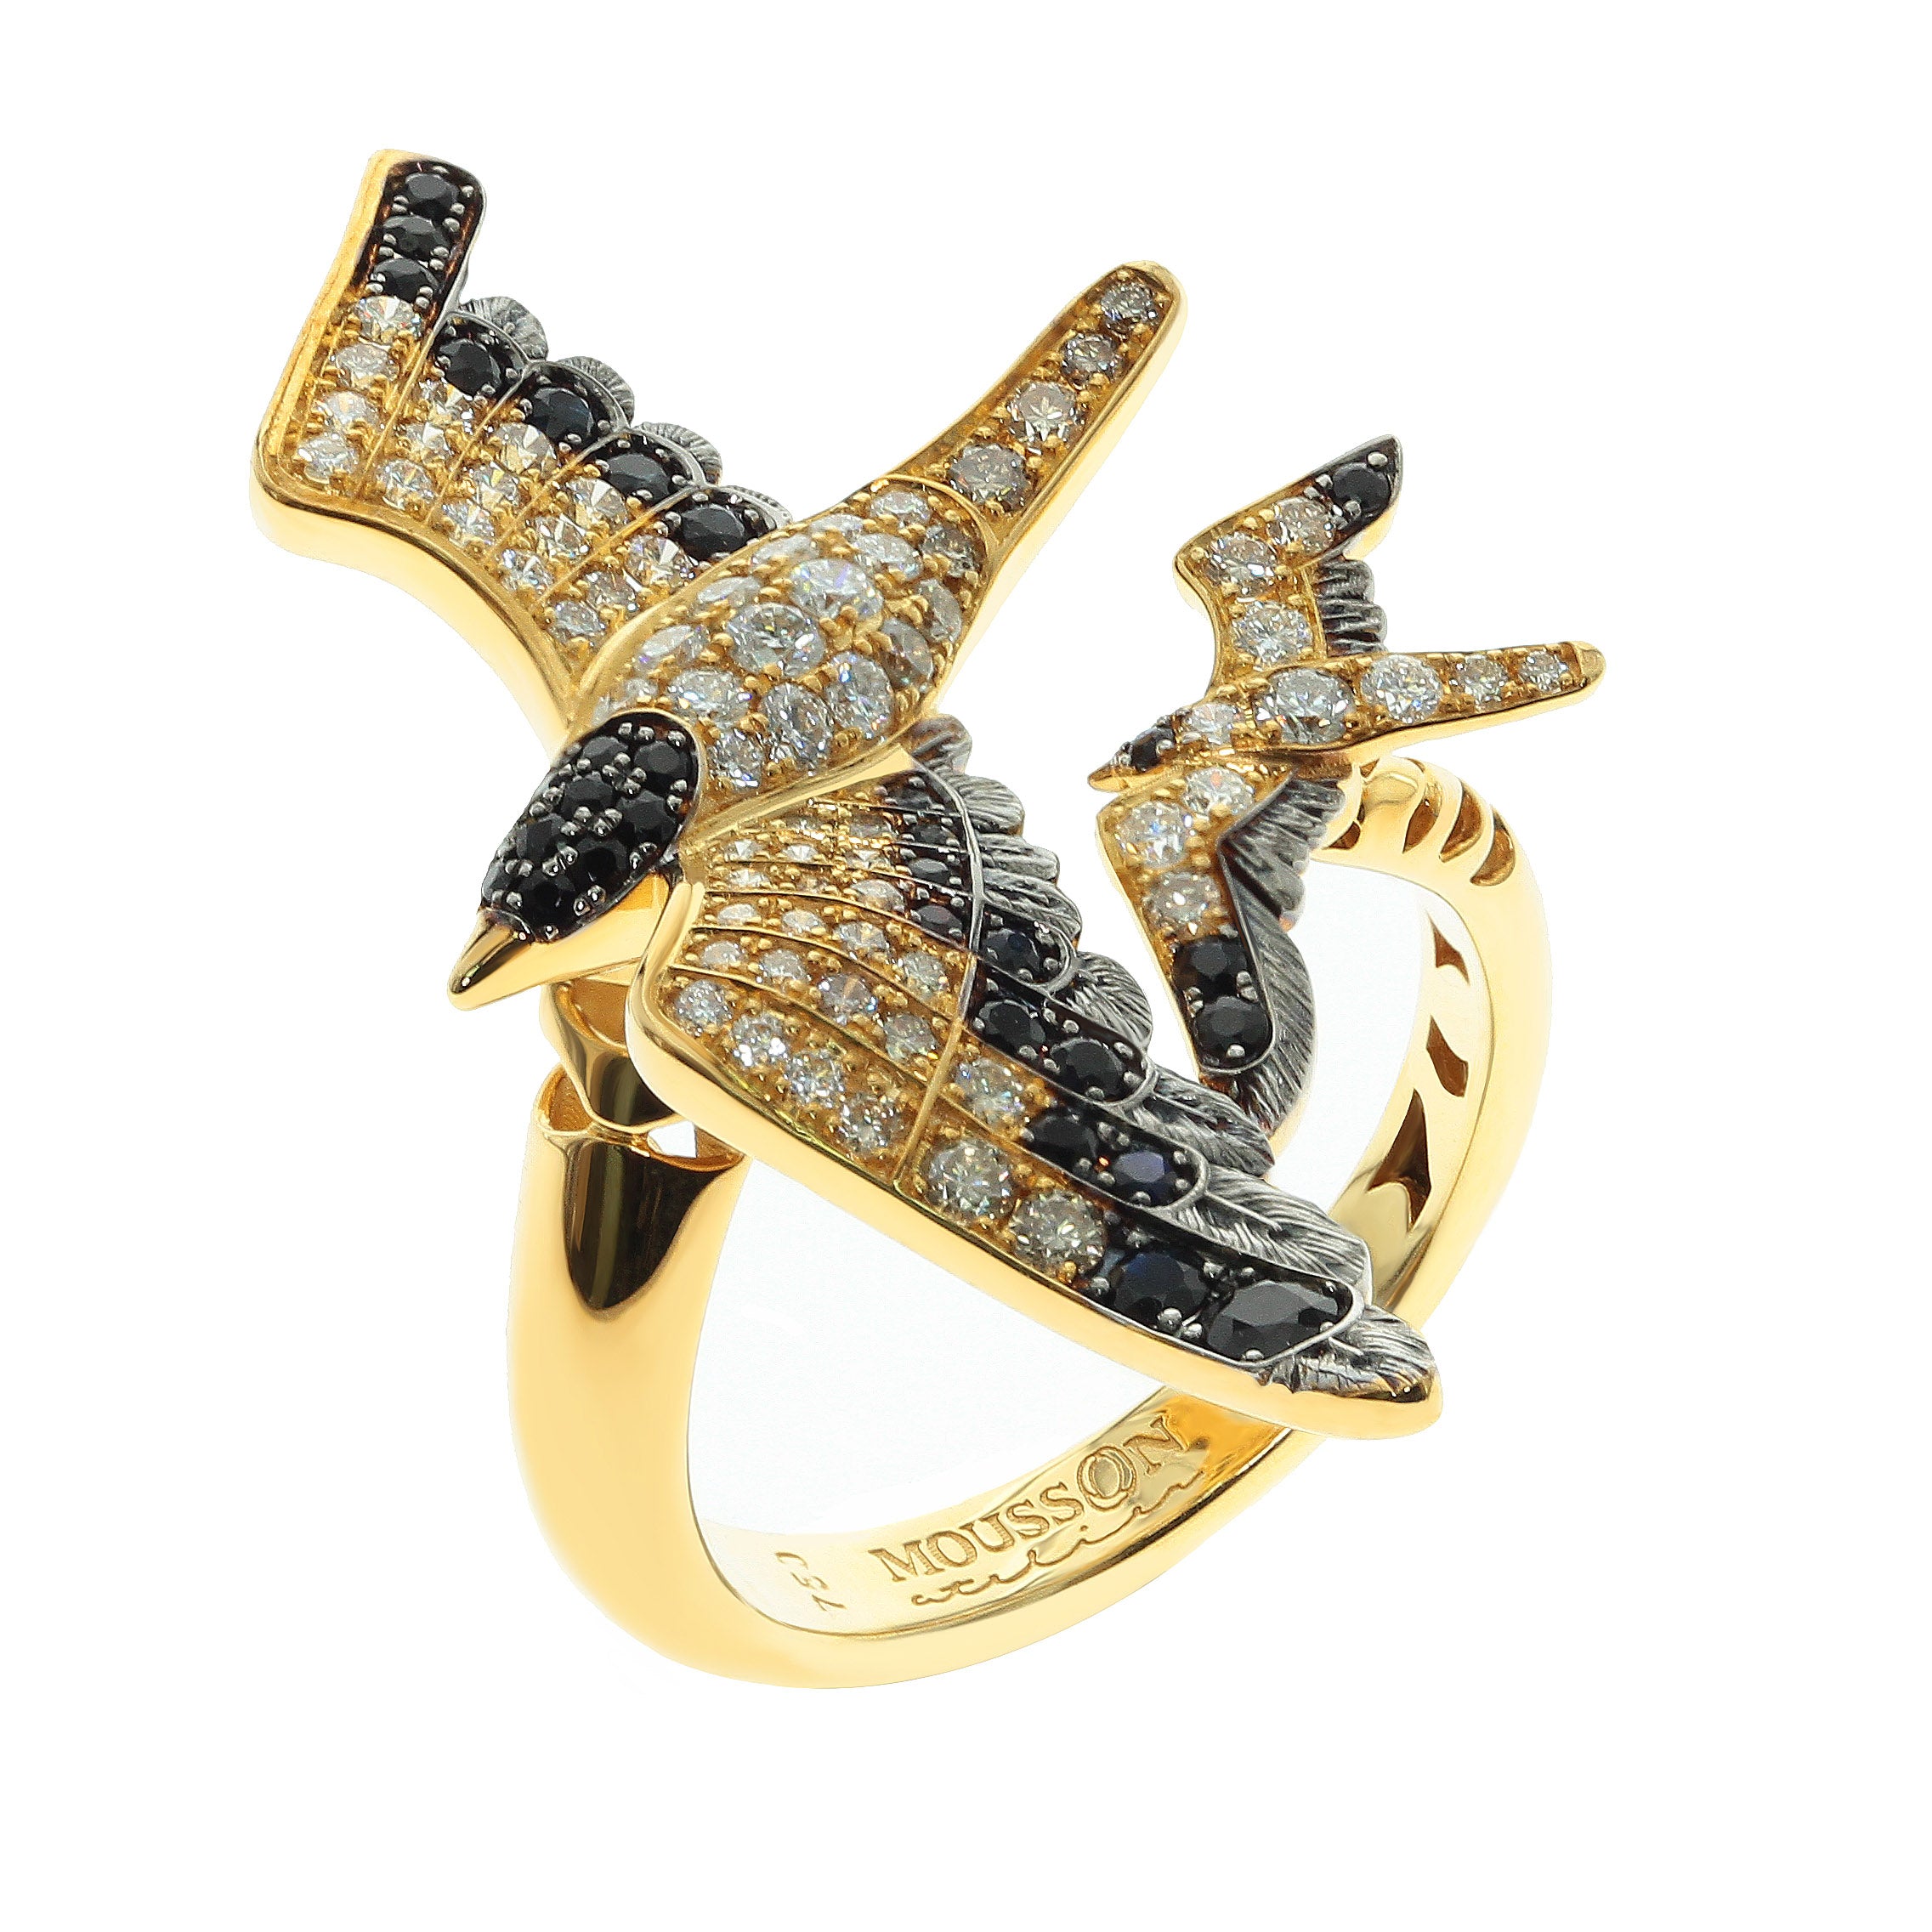 R 0294-0, 18K Yellow Gold, Champagne and Black Diamonds Ring